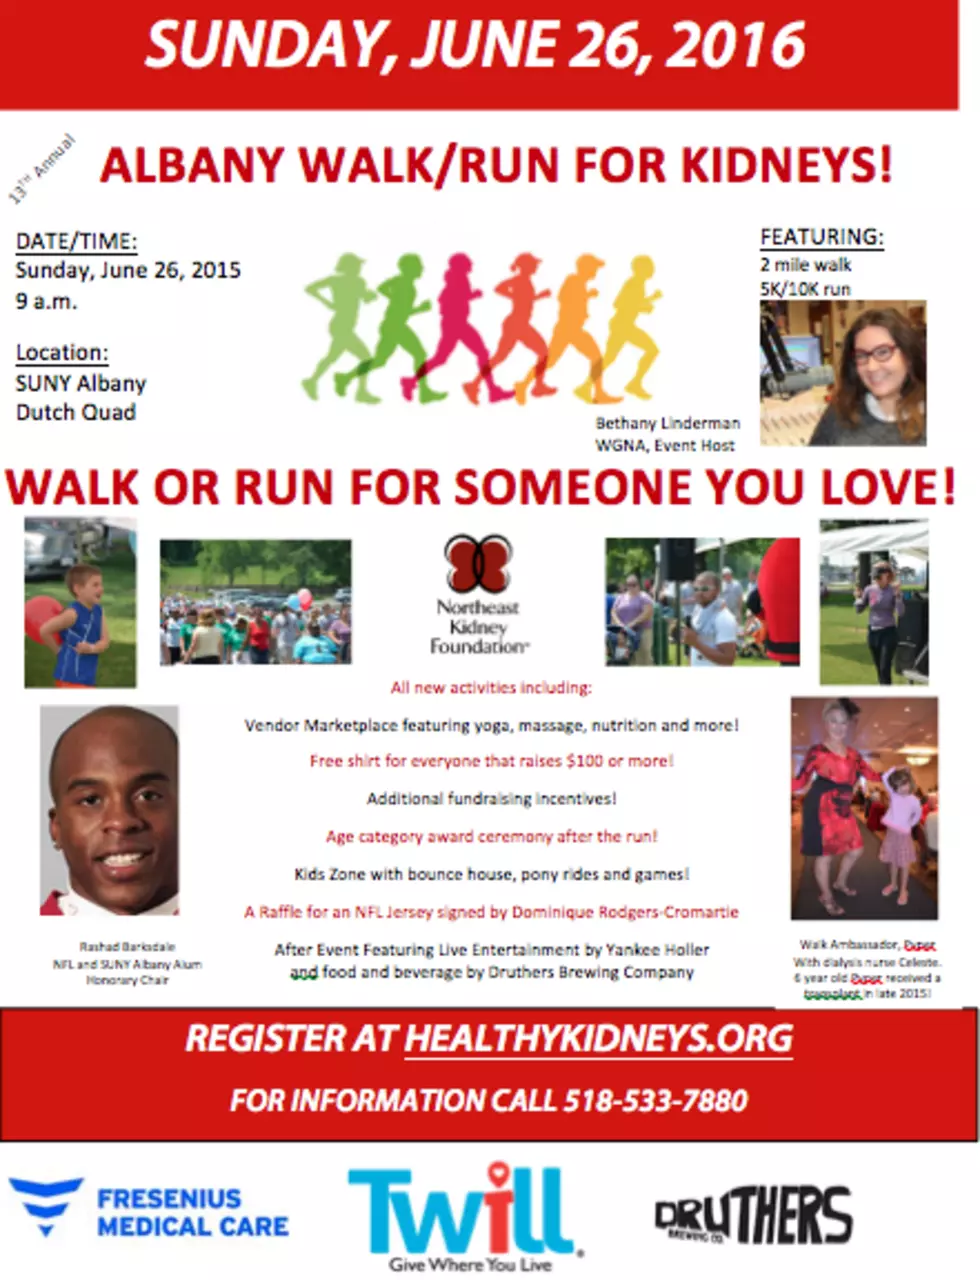 Hey Capital Region! Come Out and Walk or Run For Kidneys